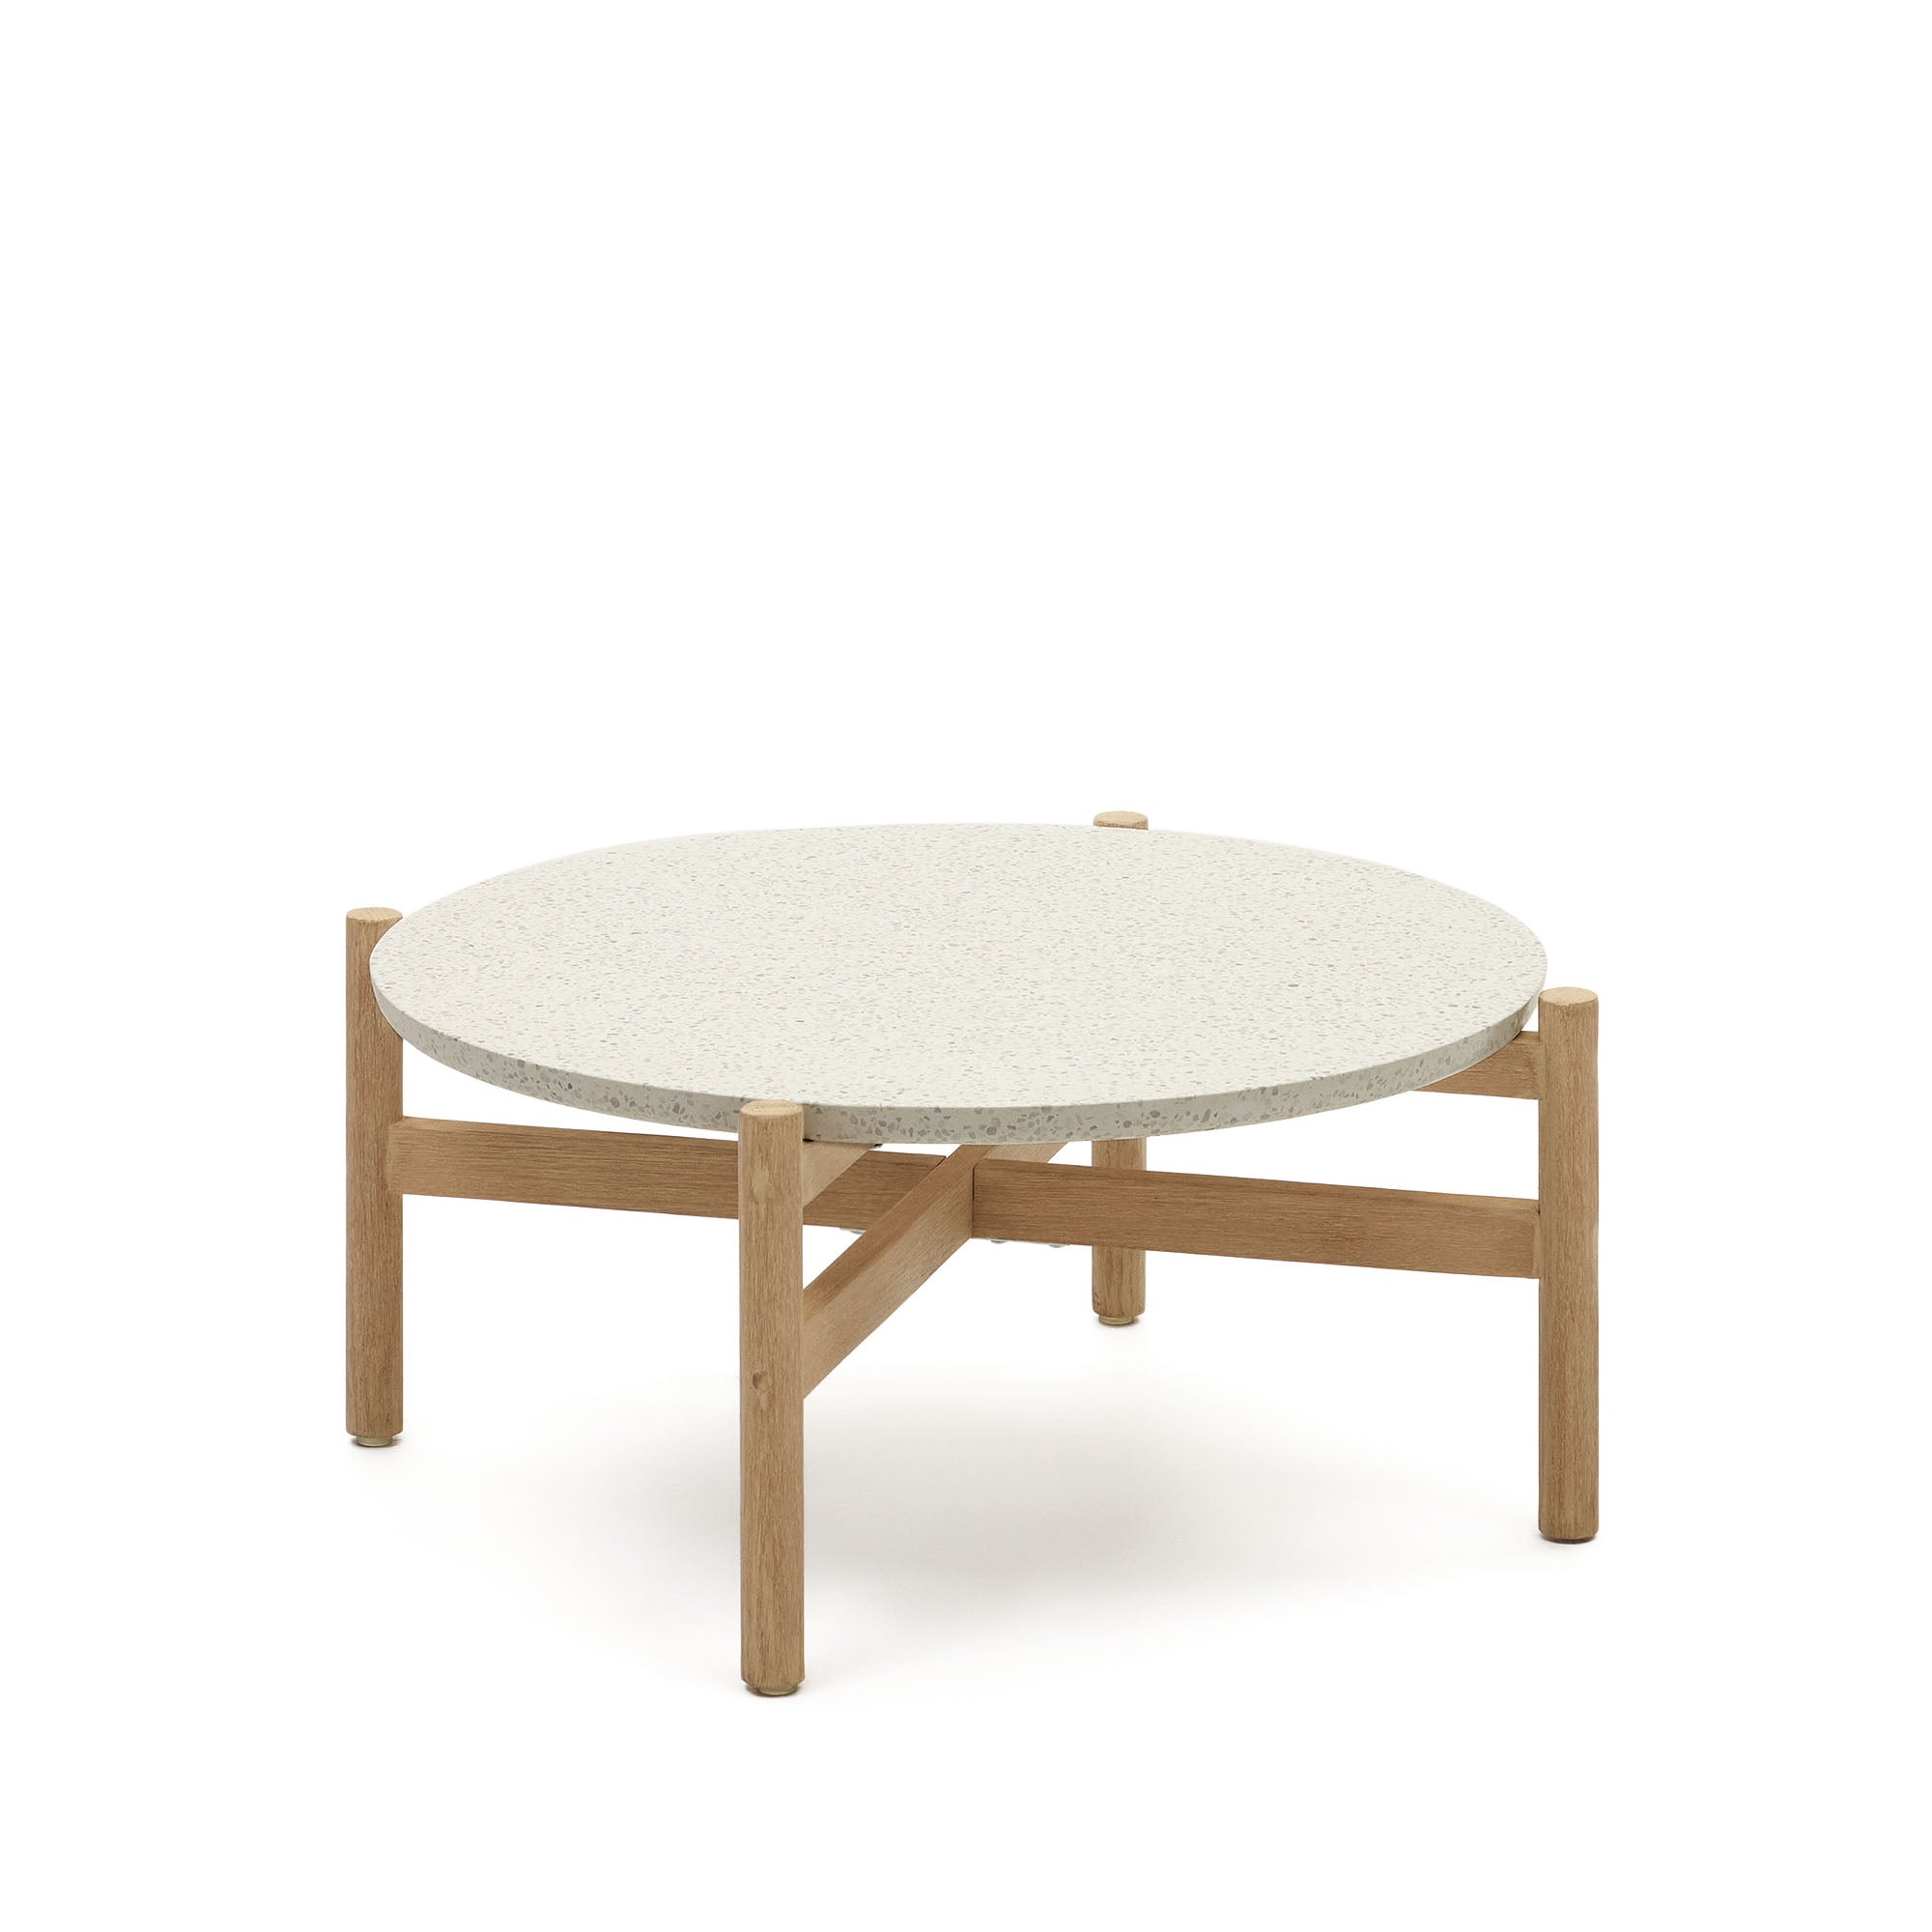 Pola solid eucalyptus wood and cement coffee table, Ø 84,4 cm FSC